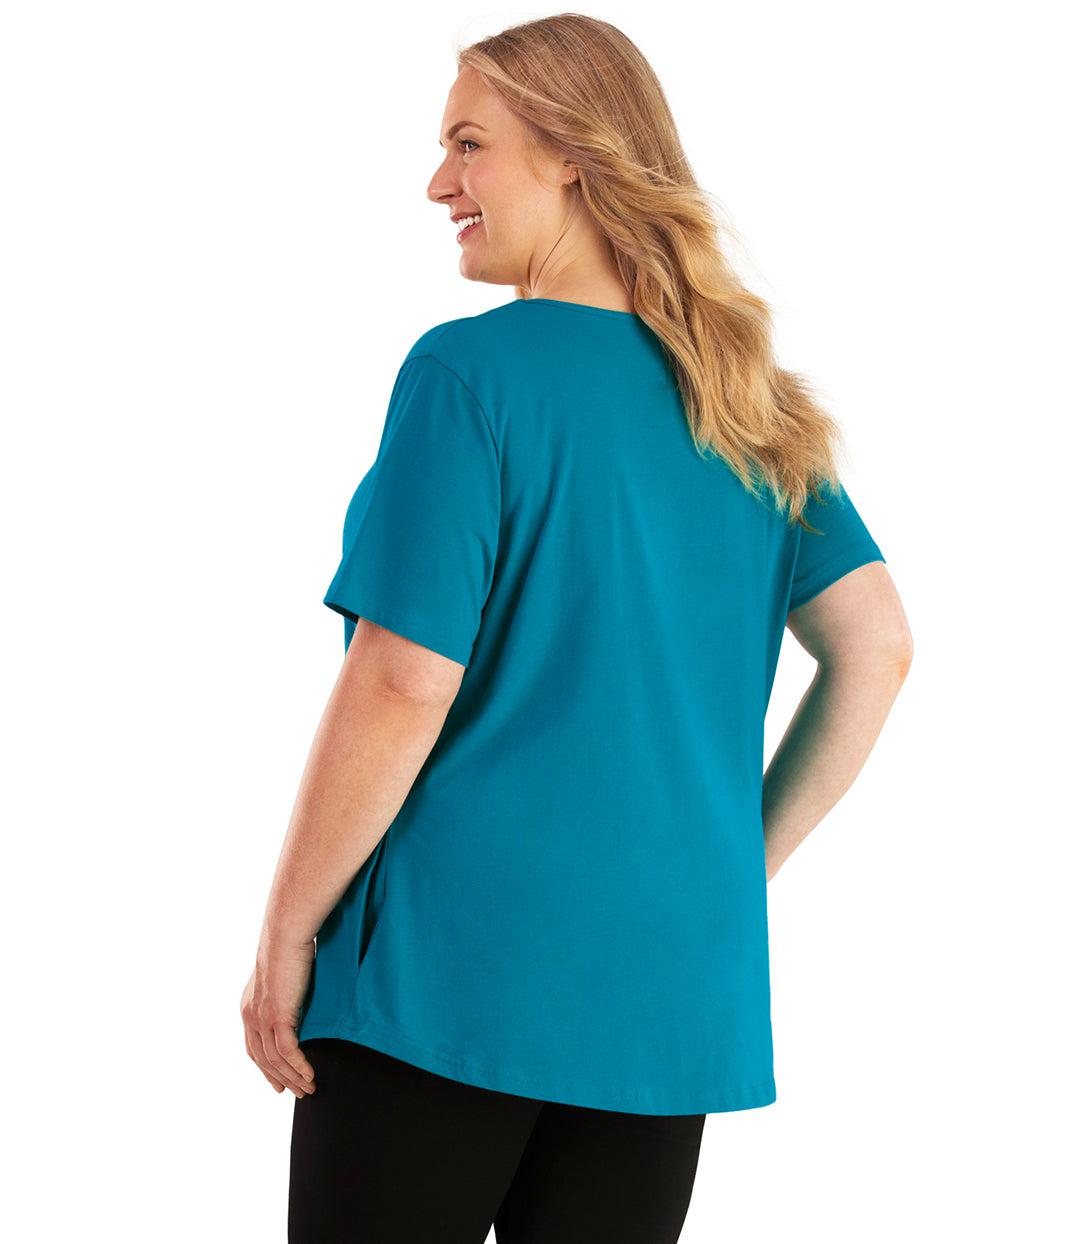 Plus size woman, facing back looking left, wearing JunoActive plus size Stretch Naturals Lite Pocket Tee in the color Teal. Her right hand is in the shirt pocket by her hip, her left arm is naturally at her side. She is wearing JunoActive Plus Size Leggings in the color Black.